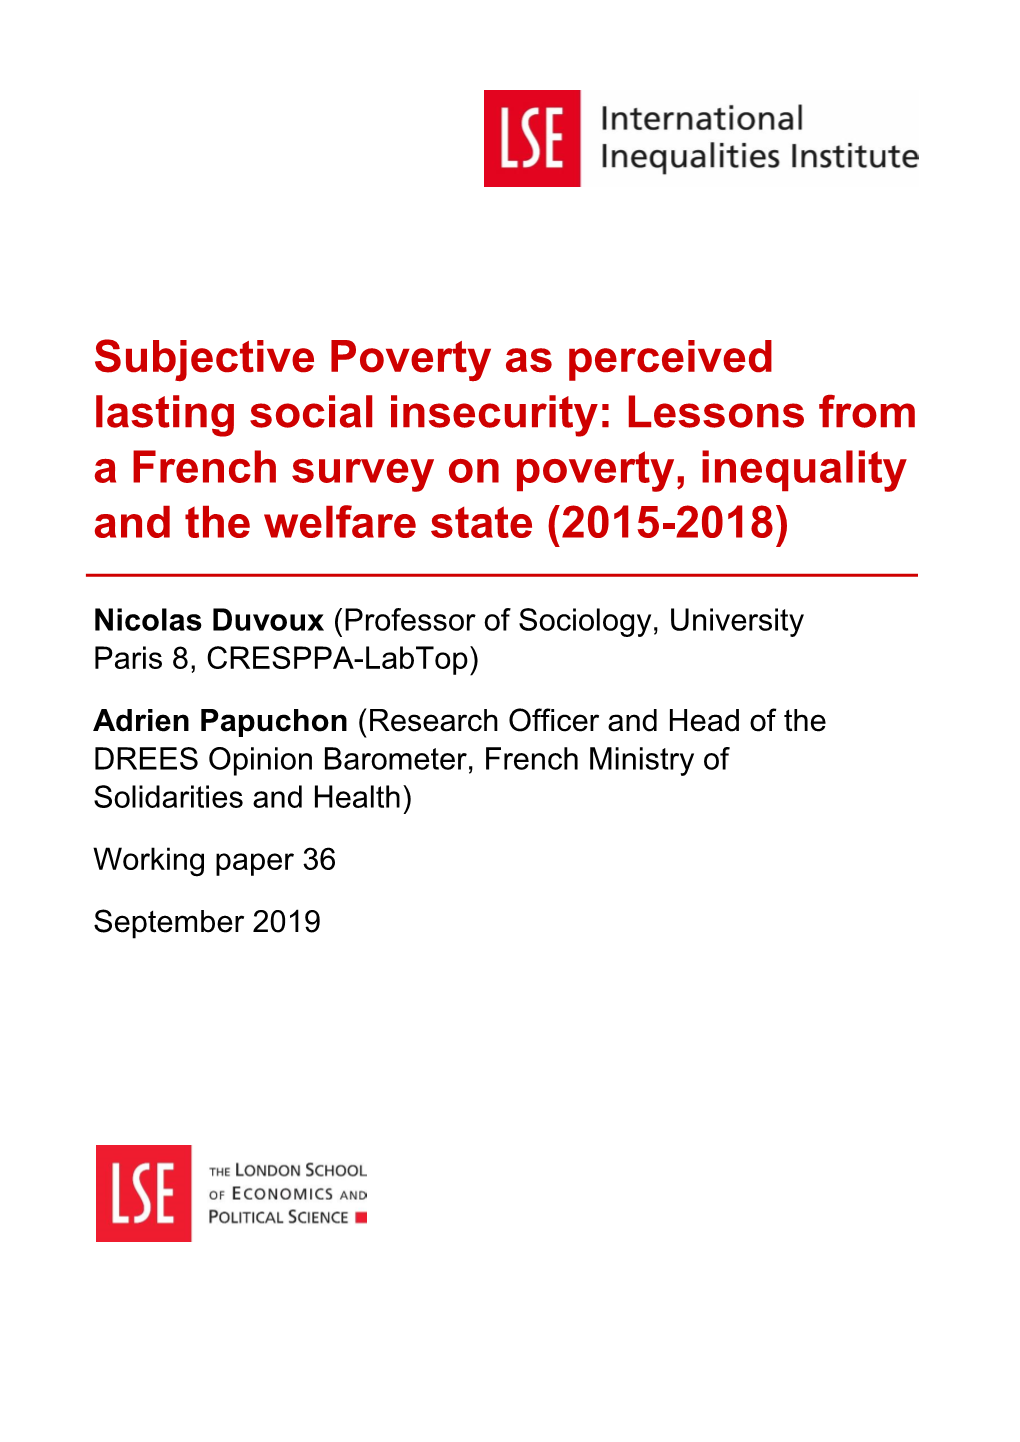 Subjective Poverty As Perceived Lasting Social Insecurity: Lessons from a French Survey on Poverty, Inequality and the Welfare State (2015-2018)